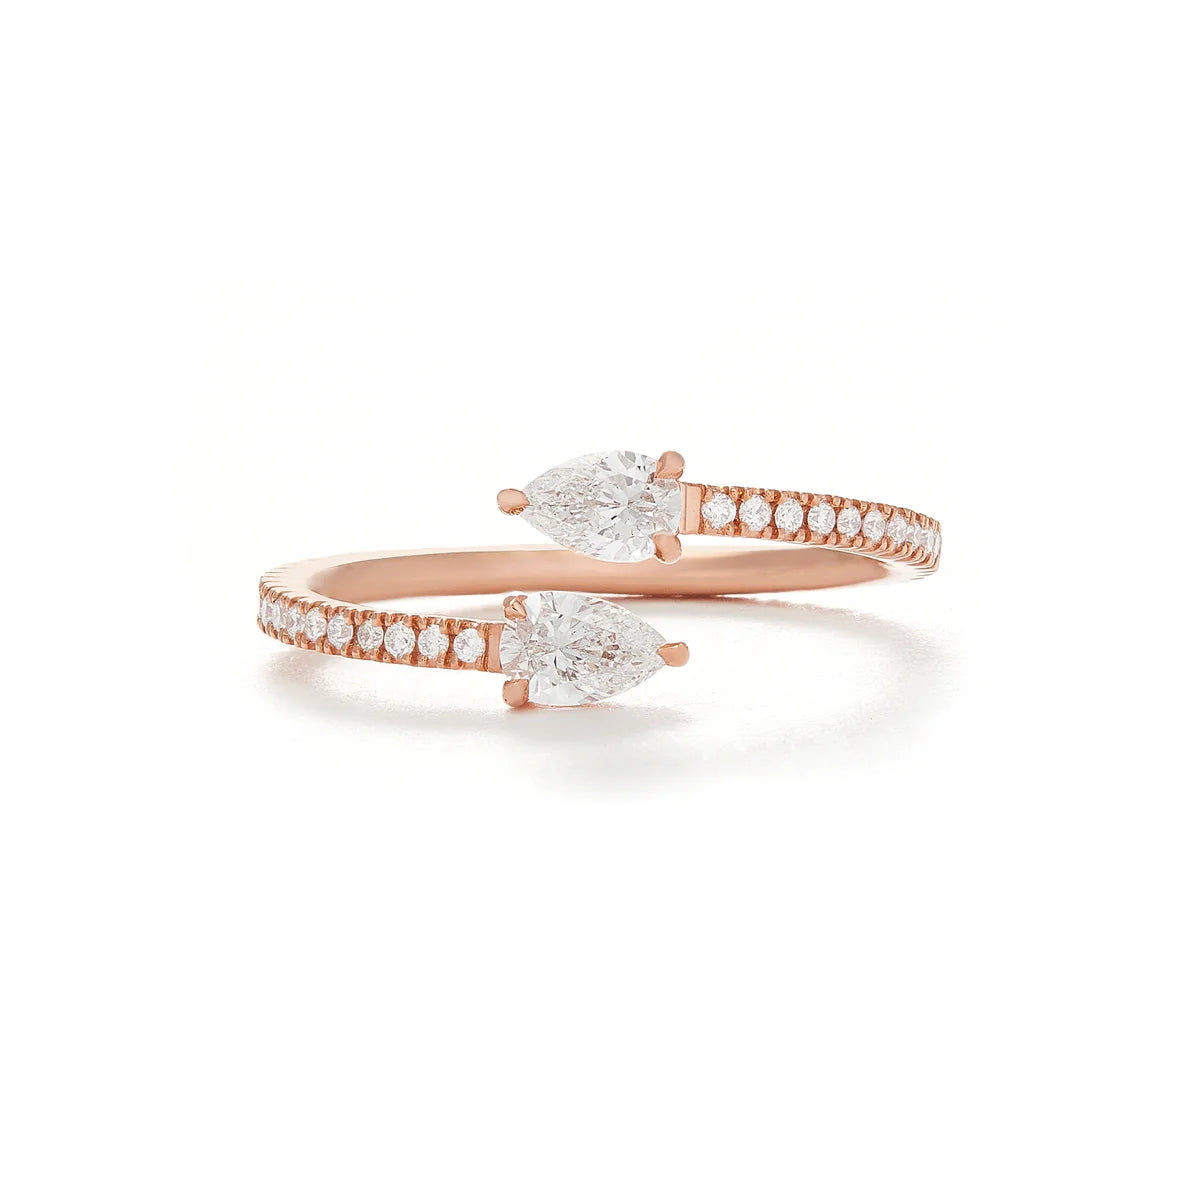 Eva Fehren Small Boa Wrap Claw Ring in 18K Rose Gold & Two Pear Shaped Diamonds and White Diamond Pave